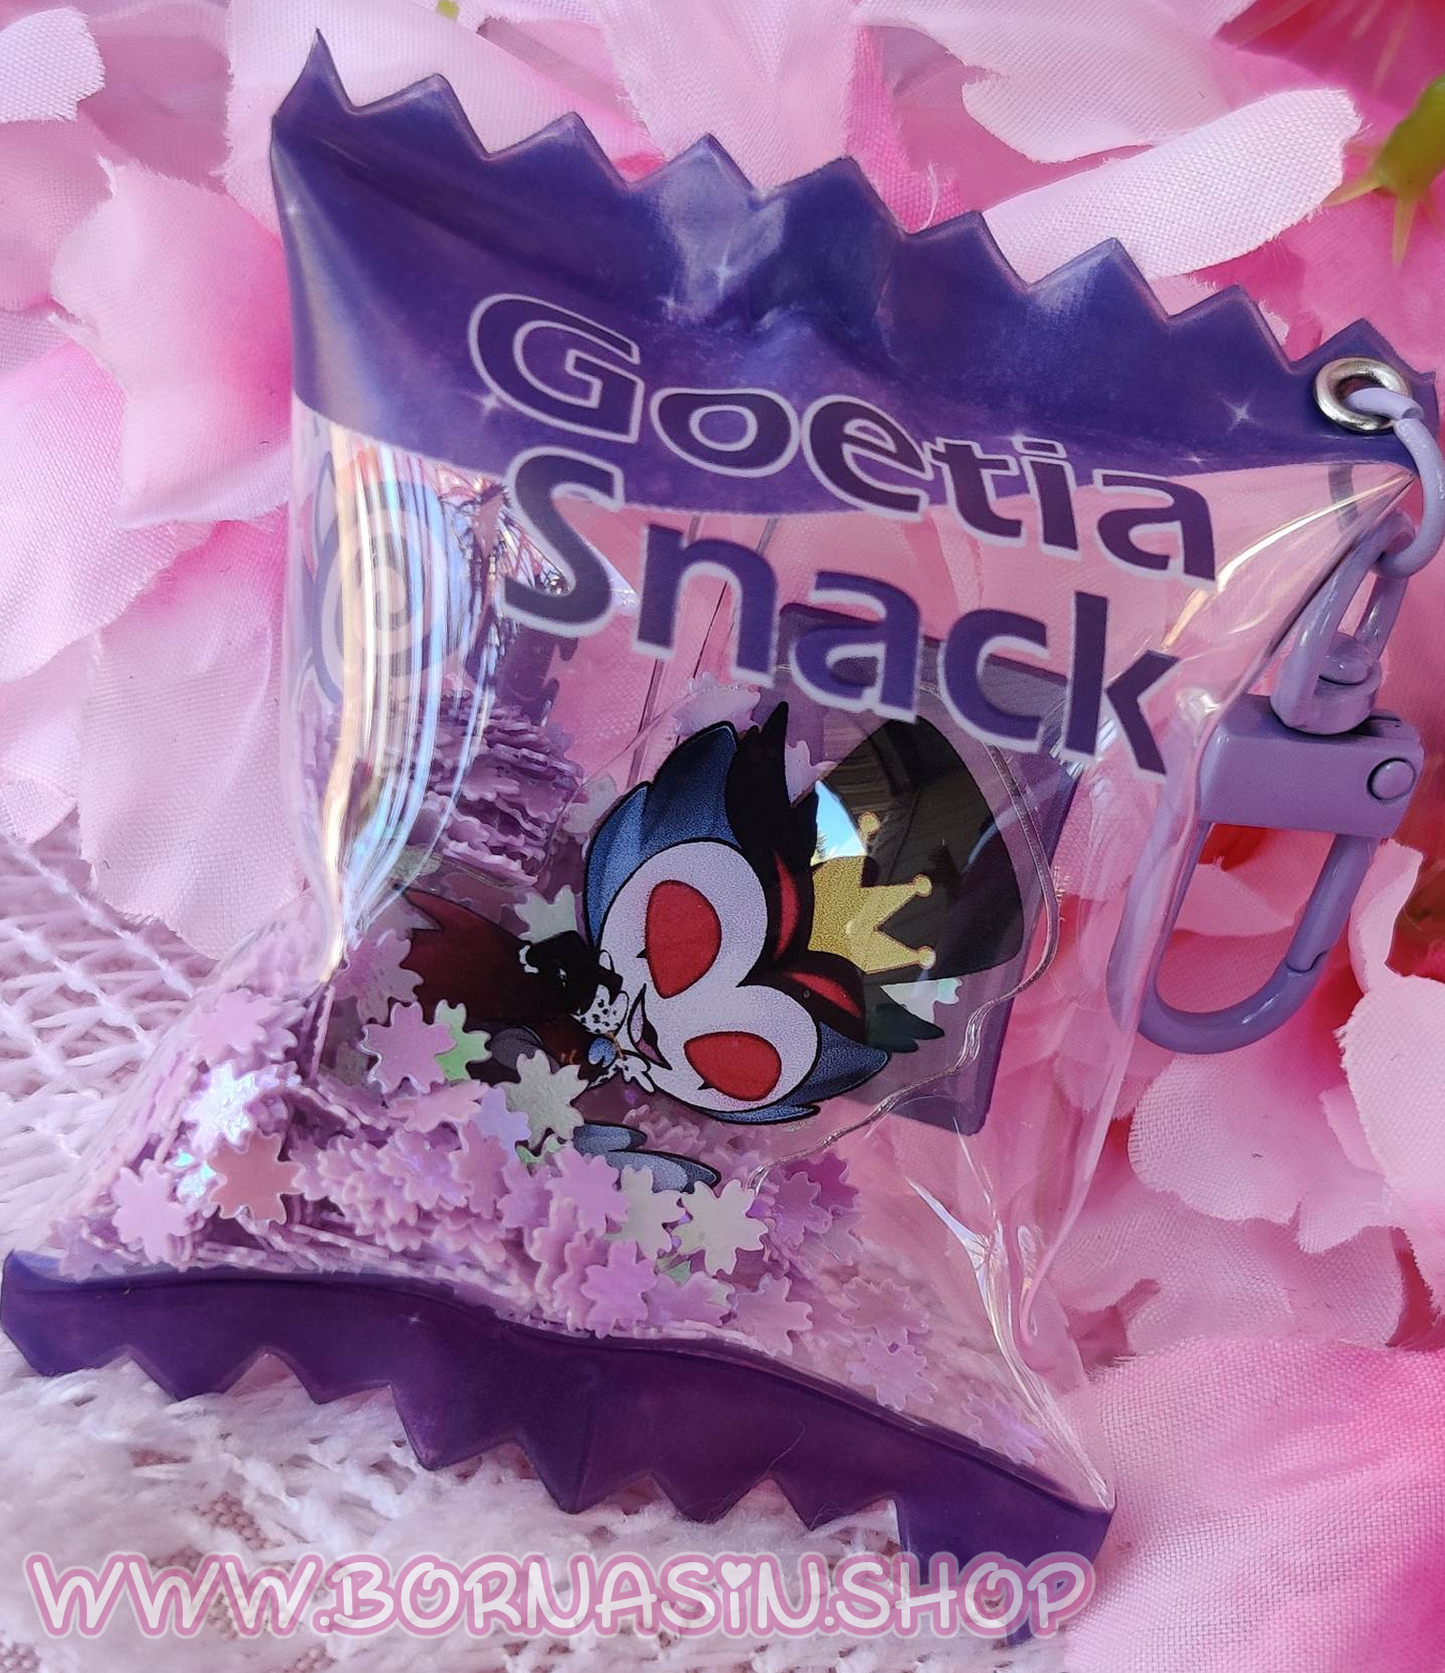 Goetia Snack 3d Candy Bag Charm